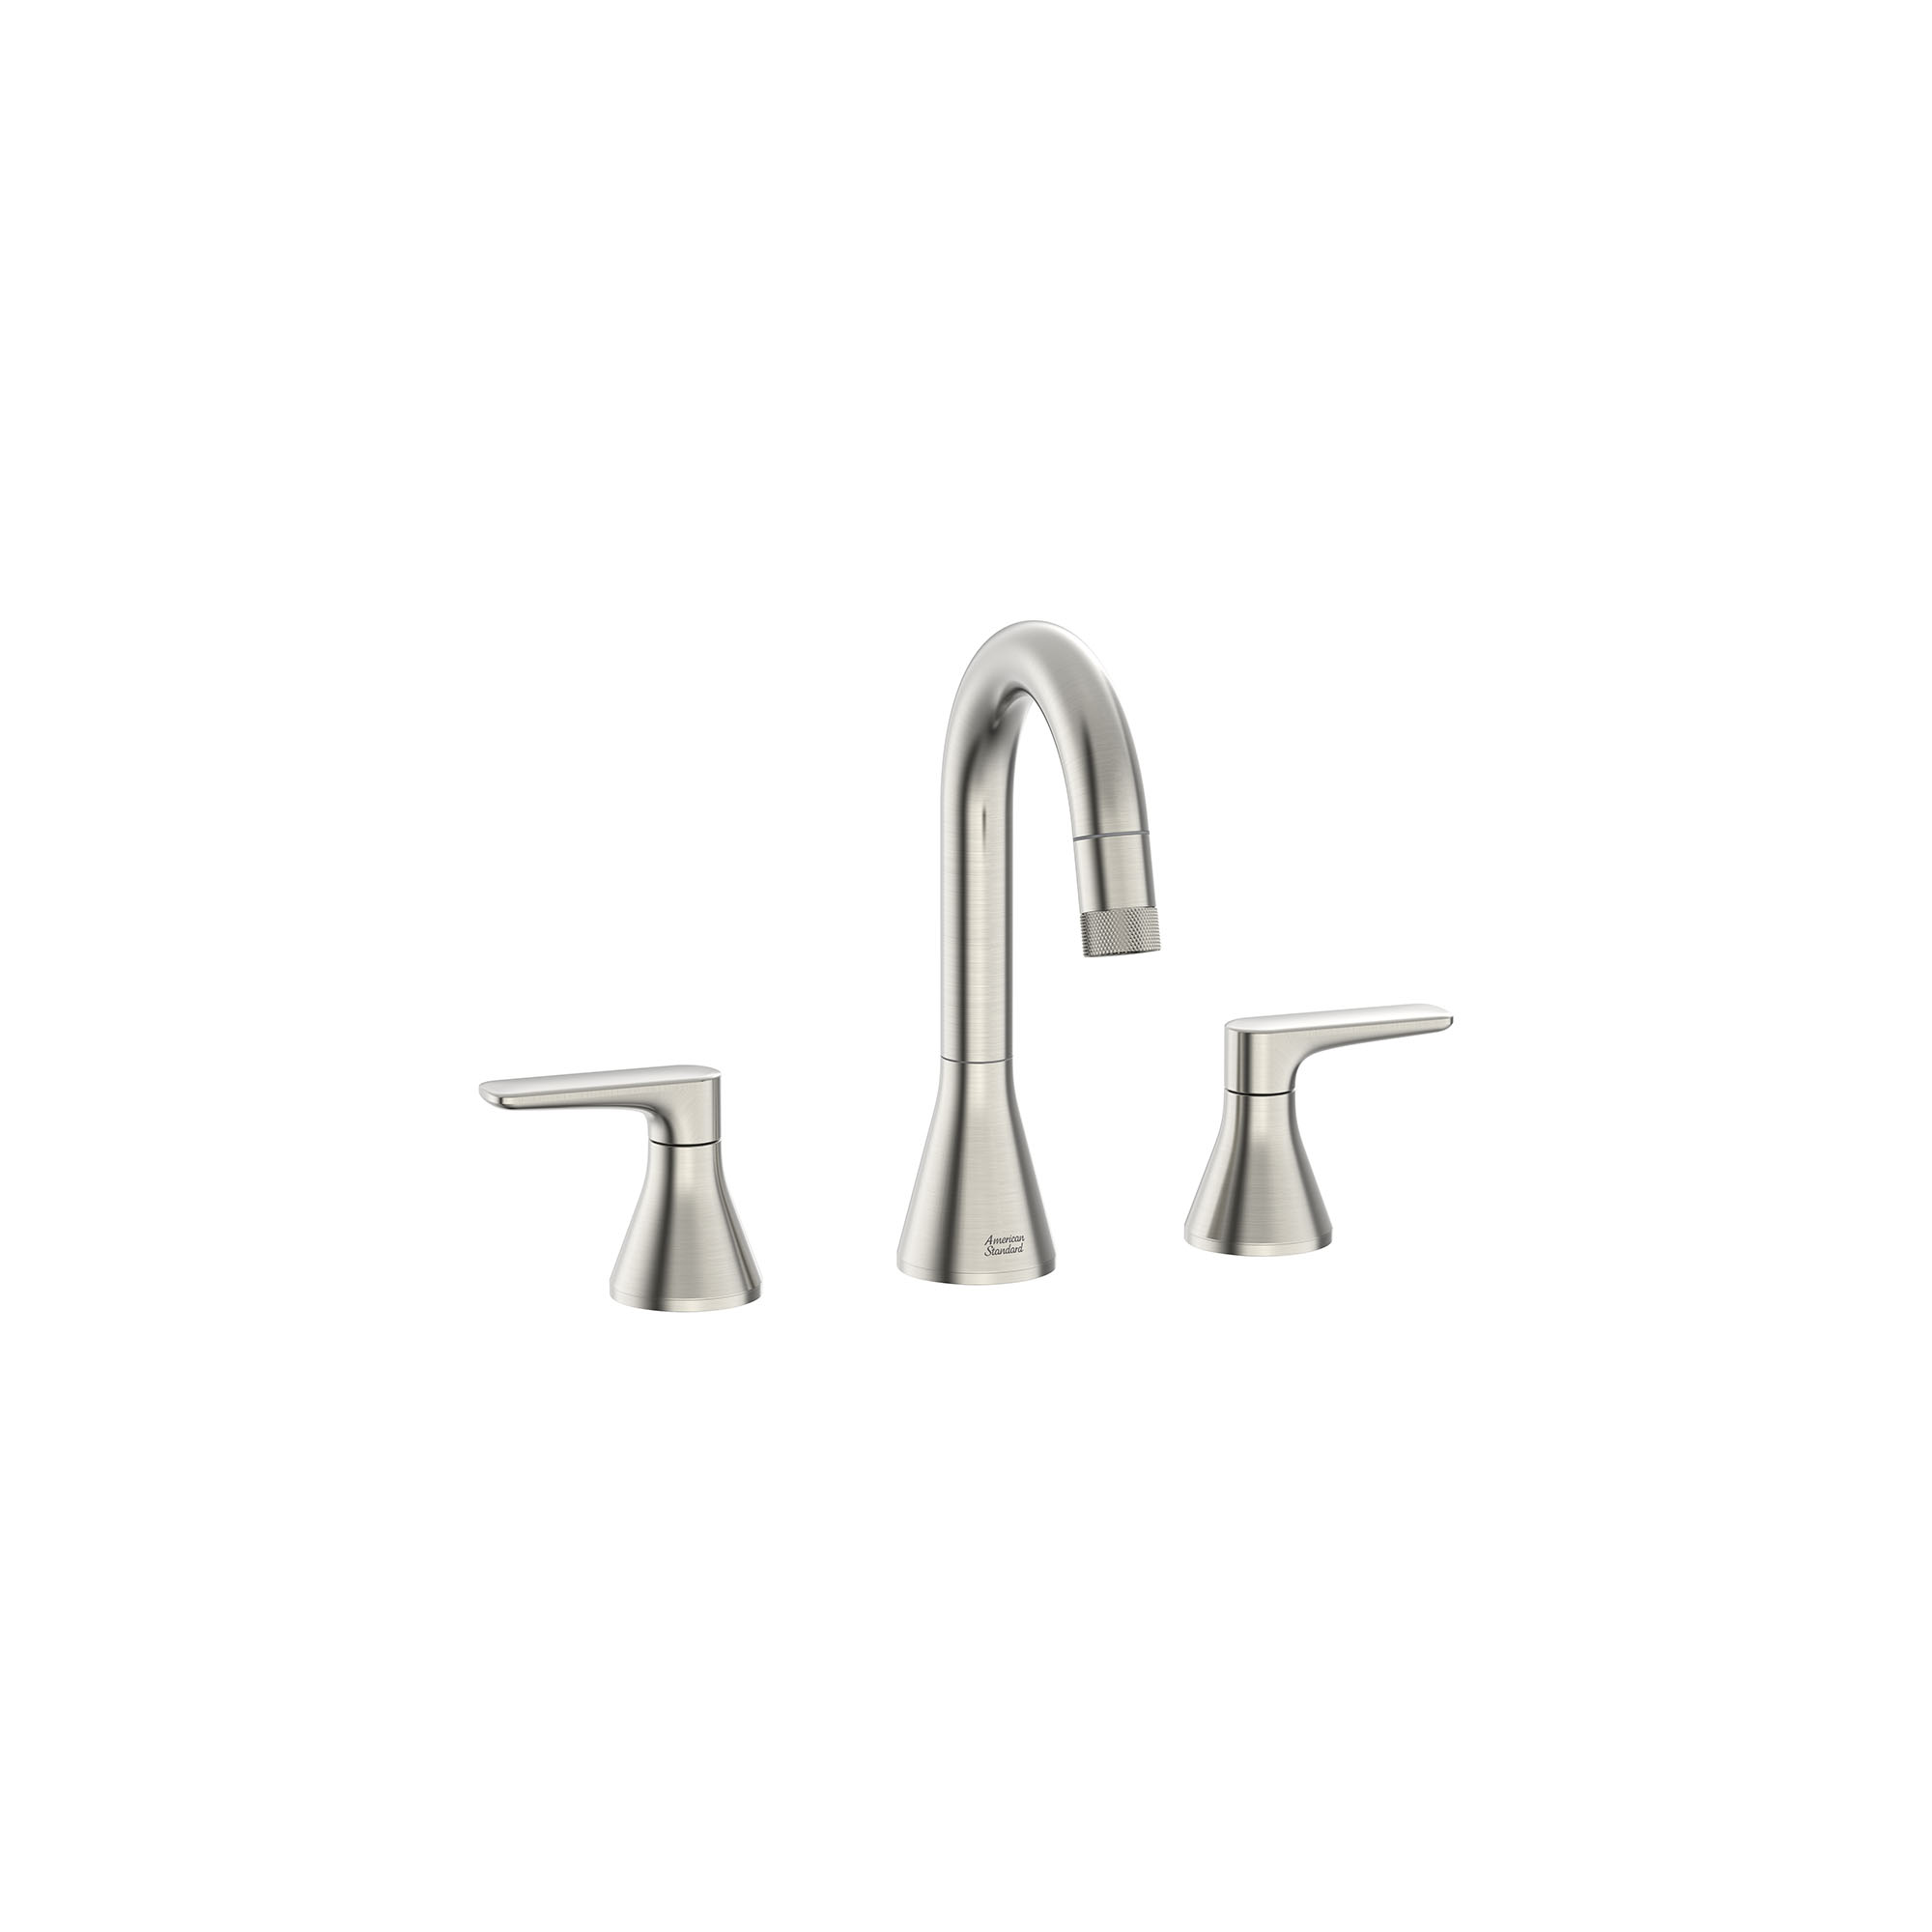 Aspirations® 8-Inch Widespread 2-Handle Pull-Down Bathroom Faucet 1.2gpm/4.5 L/min With Lever Handles